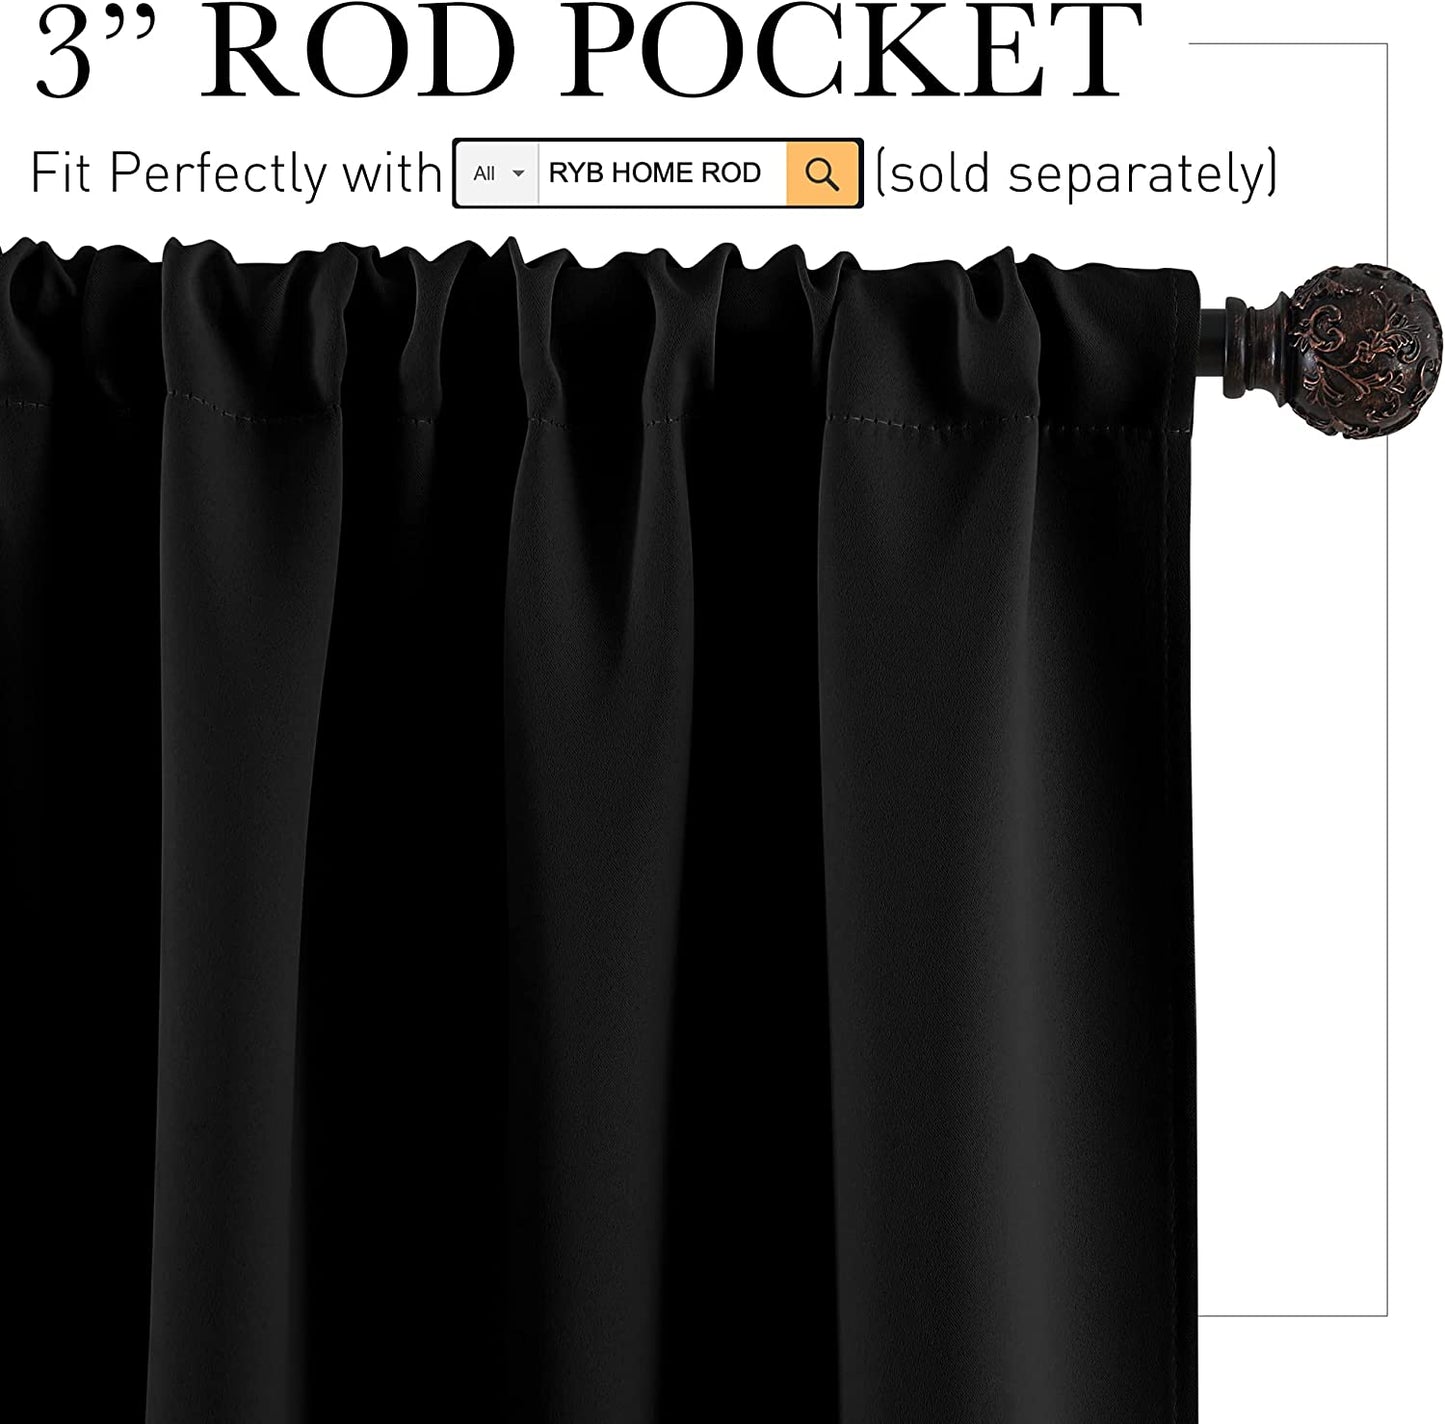 RYB HOME Blackout Curtains Black - Sunlight Block Energy Saving Drapes for Bedroom Bathroom Home Office Small Window Treatment Panels, W 29 X L 36 Inch, Black, 2 Panels  RYB HOME   